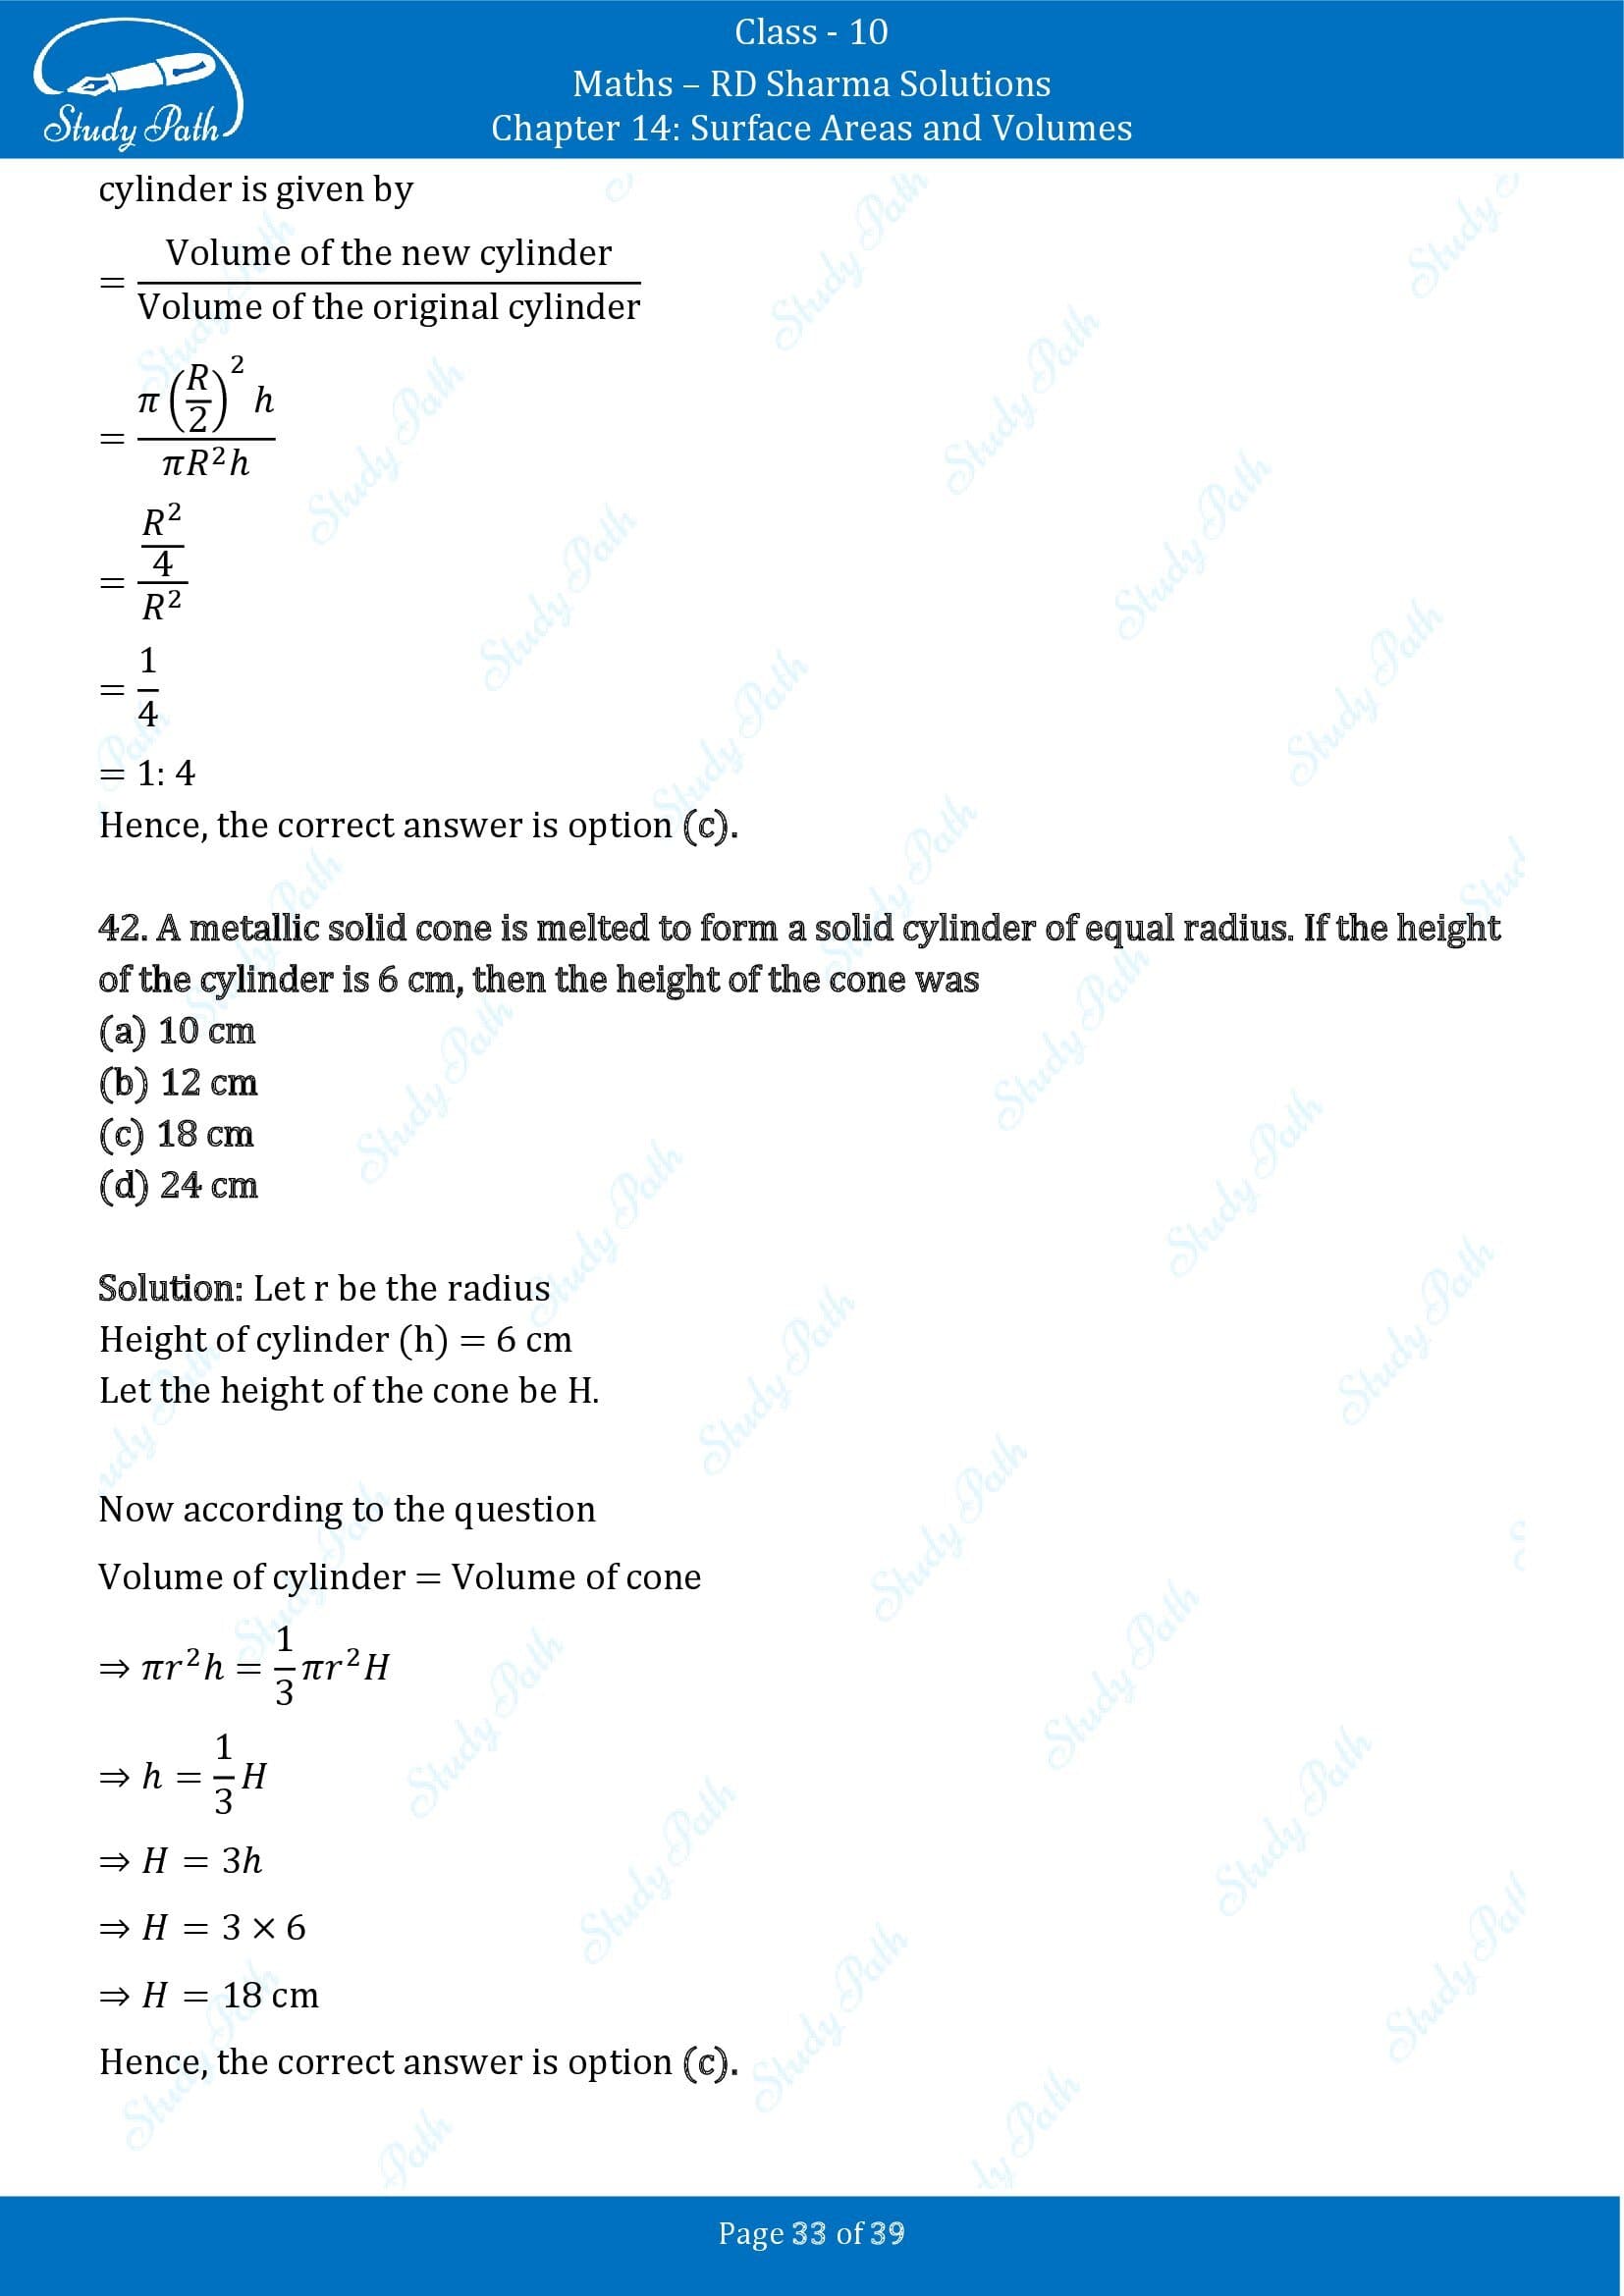 RD Sharma Solutions Class 10 Chapter 14 Surface Areas and Volumes Multiple Choice Question MCQs 00033